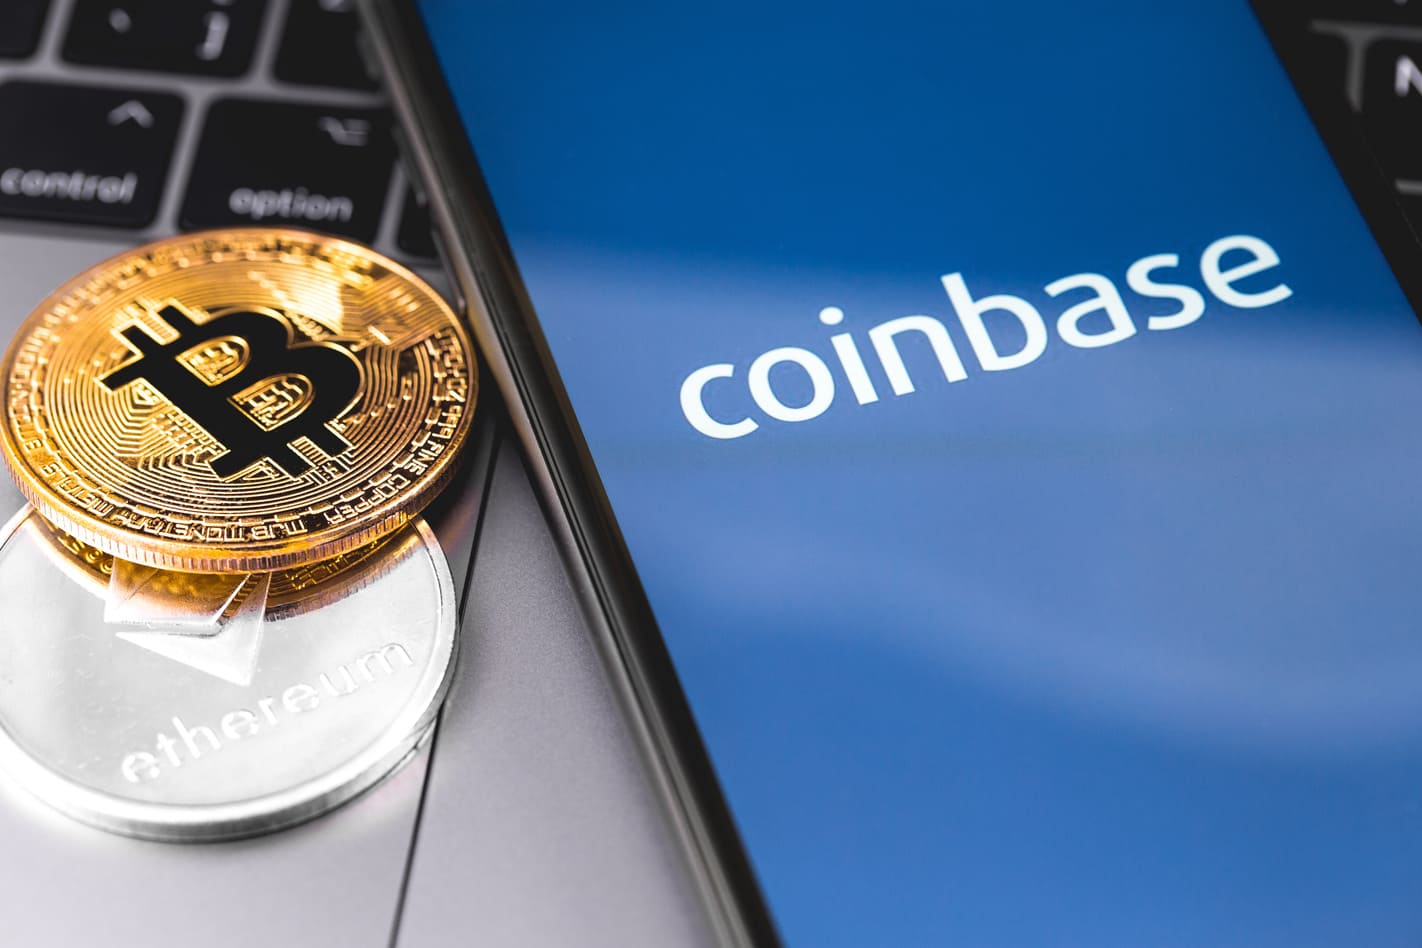 XRP back on Coinbase after court ruling